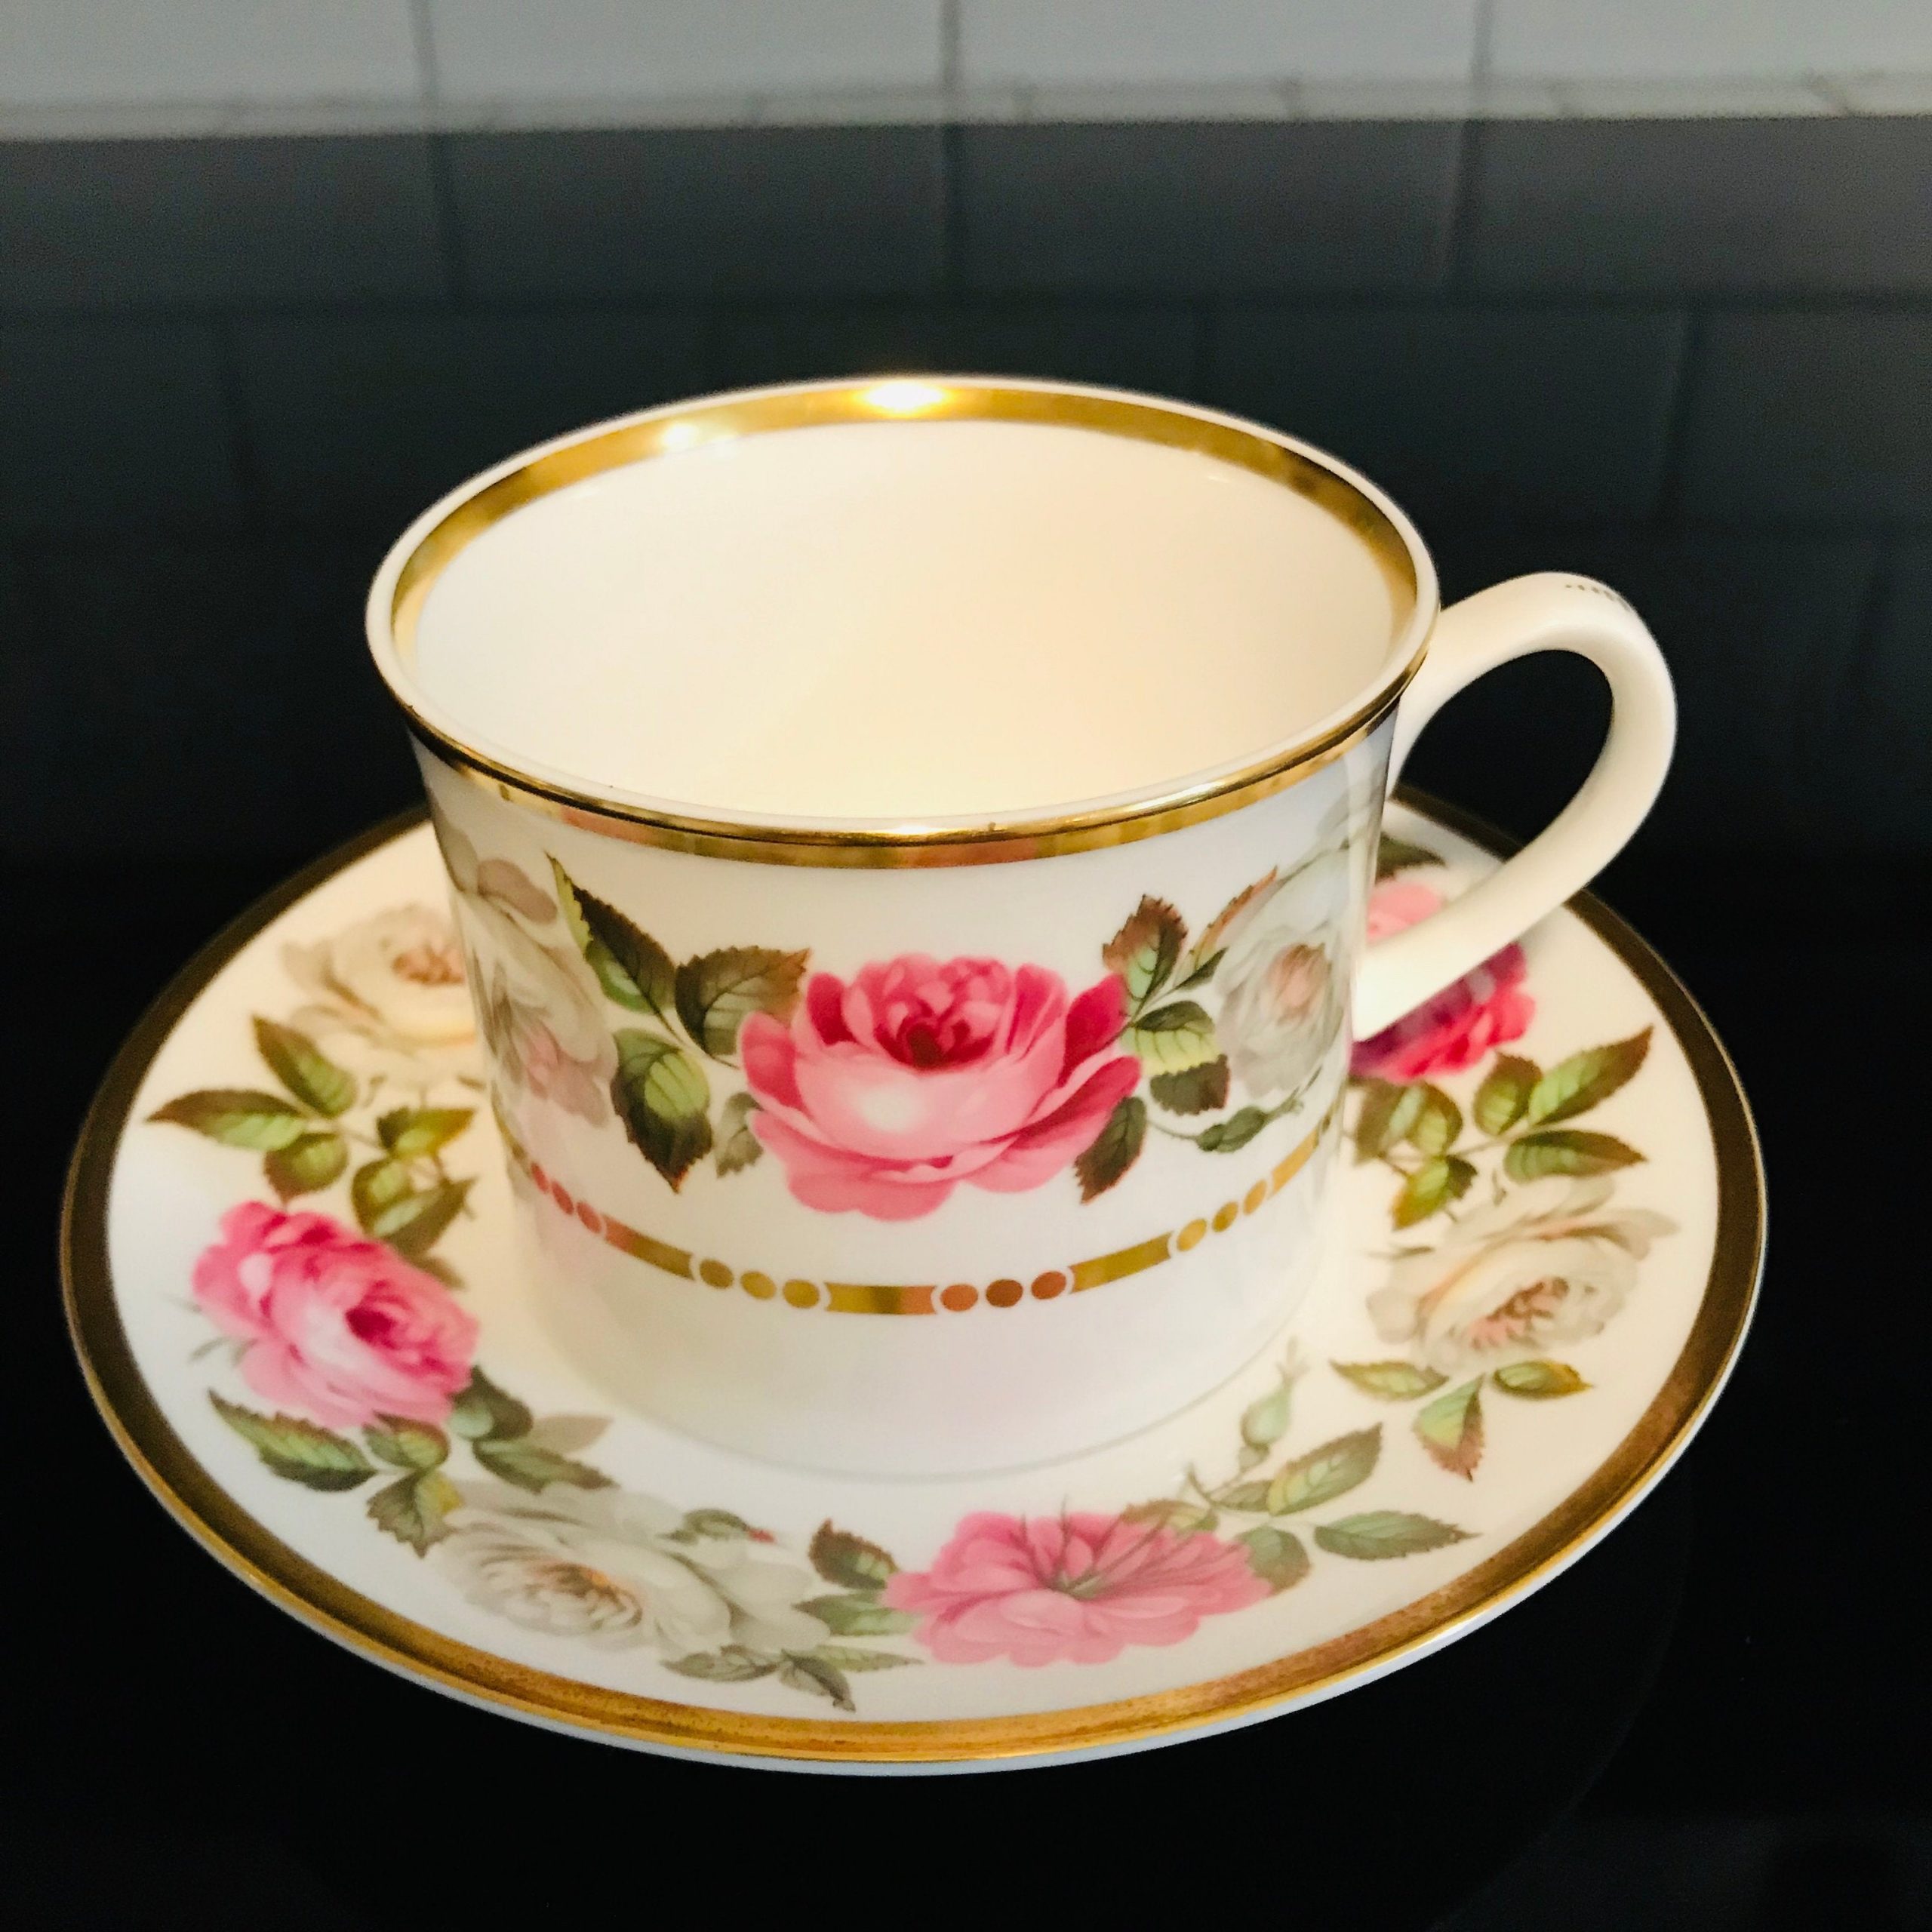 https://www.truevintageantiques.com/wp-content/uploads/2019/12/royal-worcester-tea-cup-and-saucer-fine-bone-china-england-cabbage-rose-pink-light-pink-gold-trim-collectible-display-farmhouse-coffee-5e0557f81-scaled.jpg